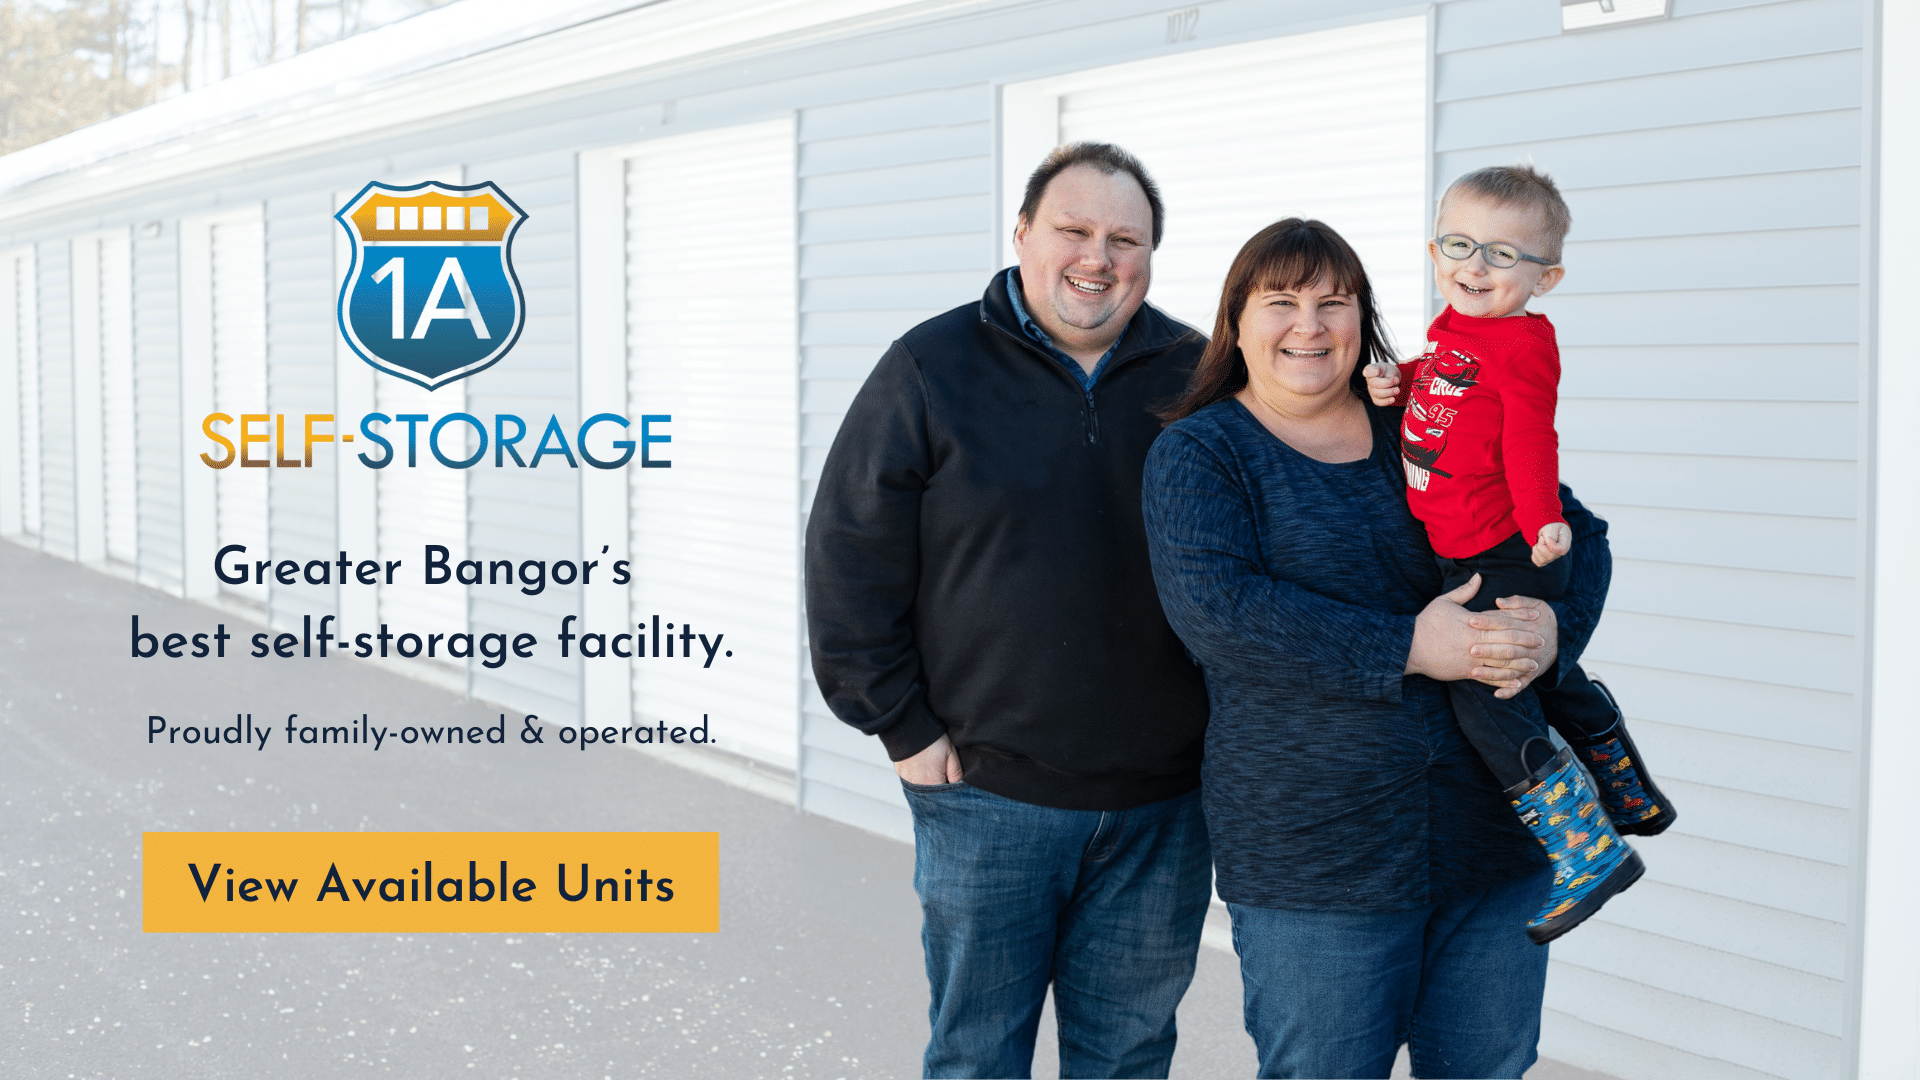 Justin, Nicki, and their son stand in front of the storage units at 1A Self-Storage.